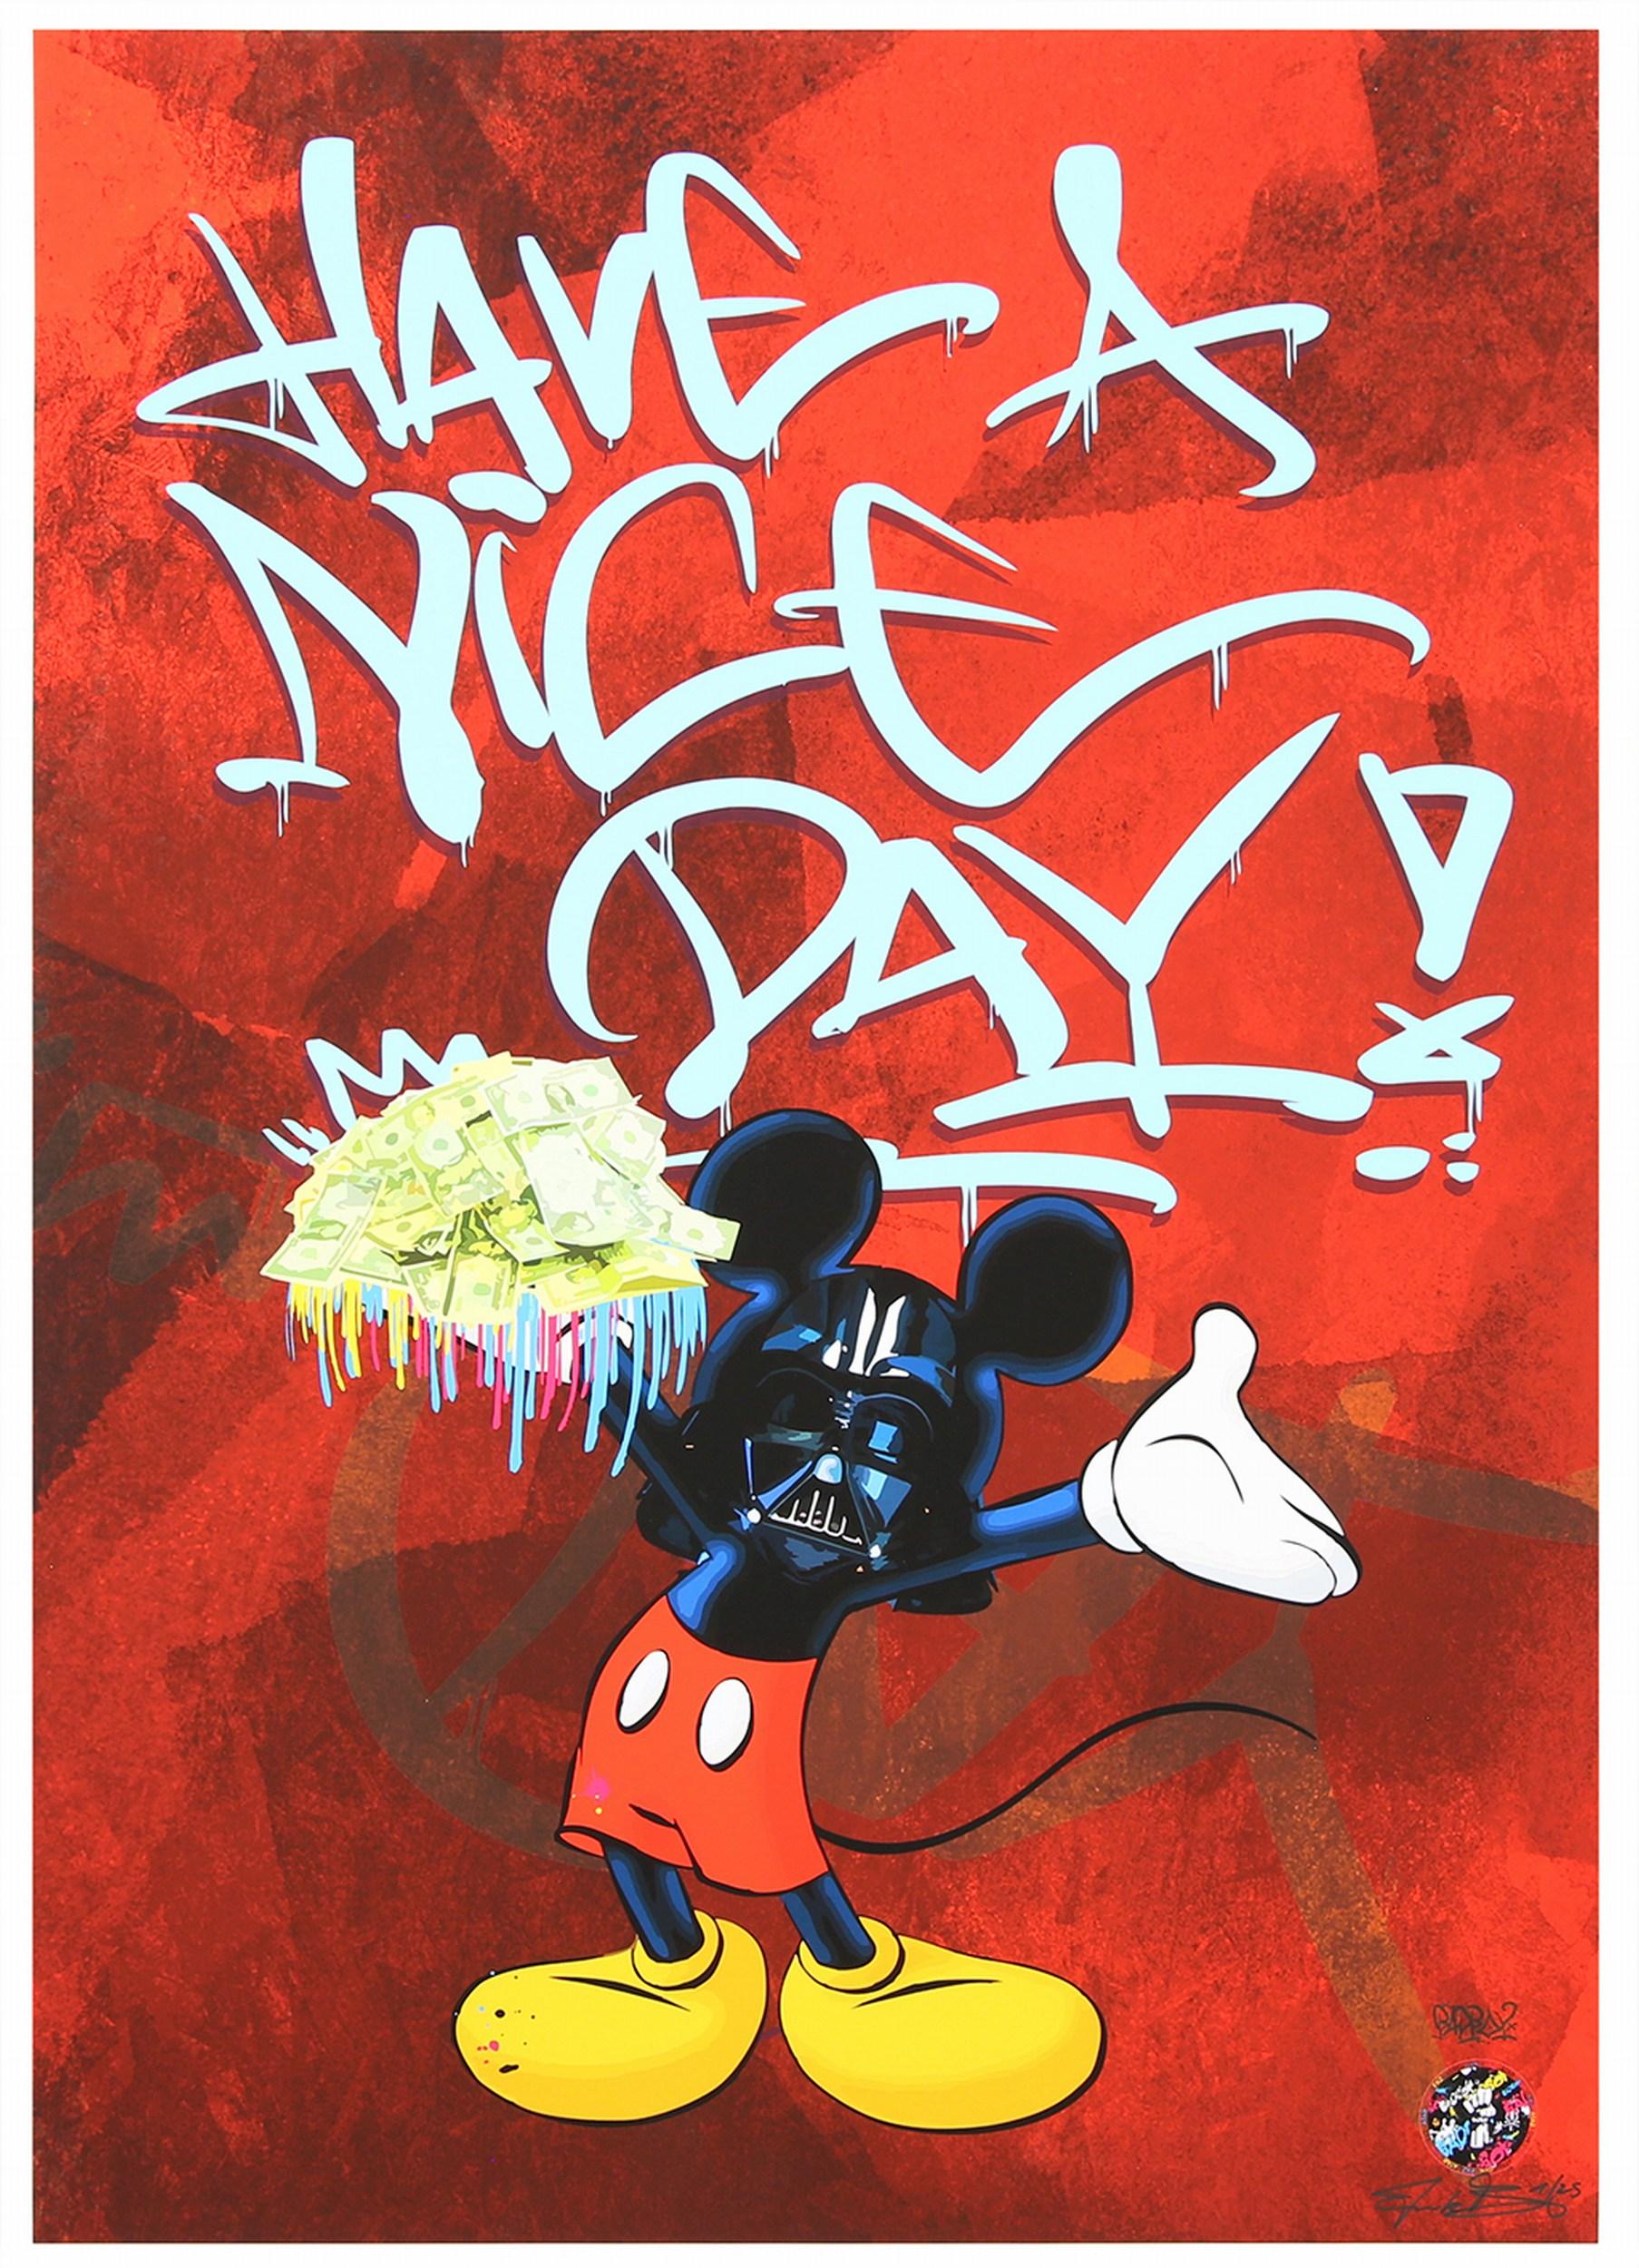  Have A Nice Day (Graffiti, Urban Art, Street Art, Mickey Mouse, Darth Vader) - Print by Frank Brenner